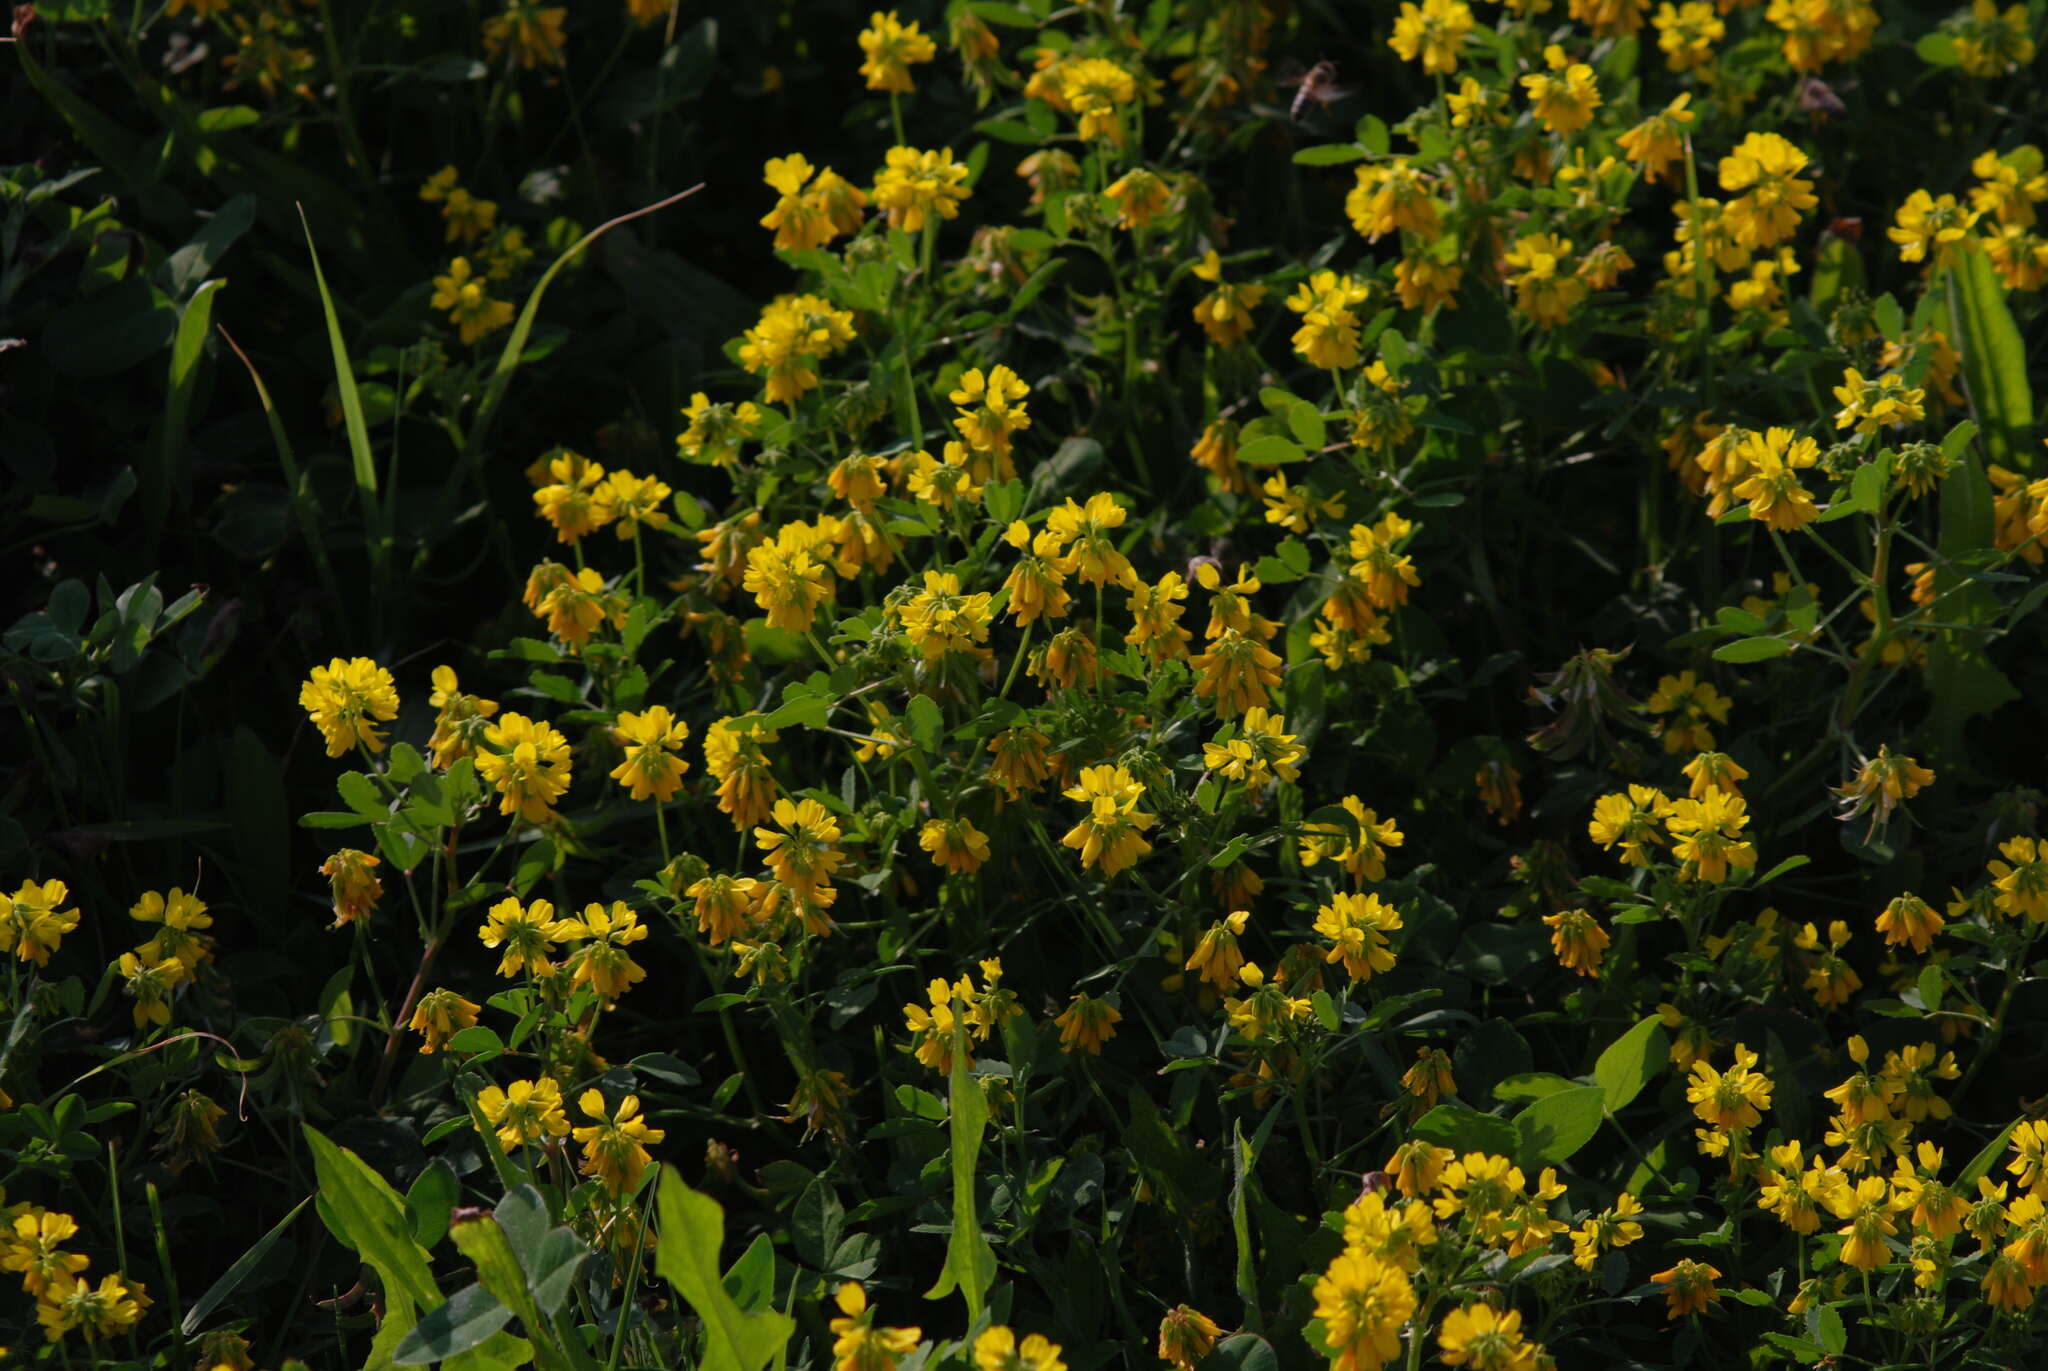 Image of cultivated fenugreek